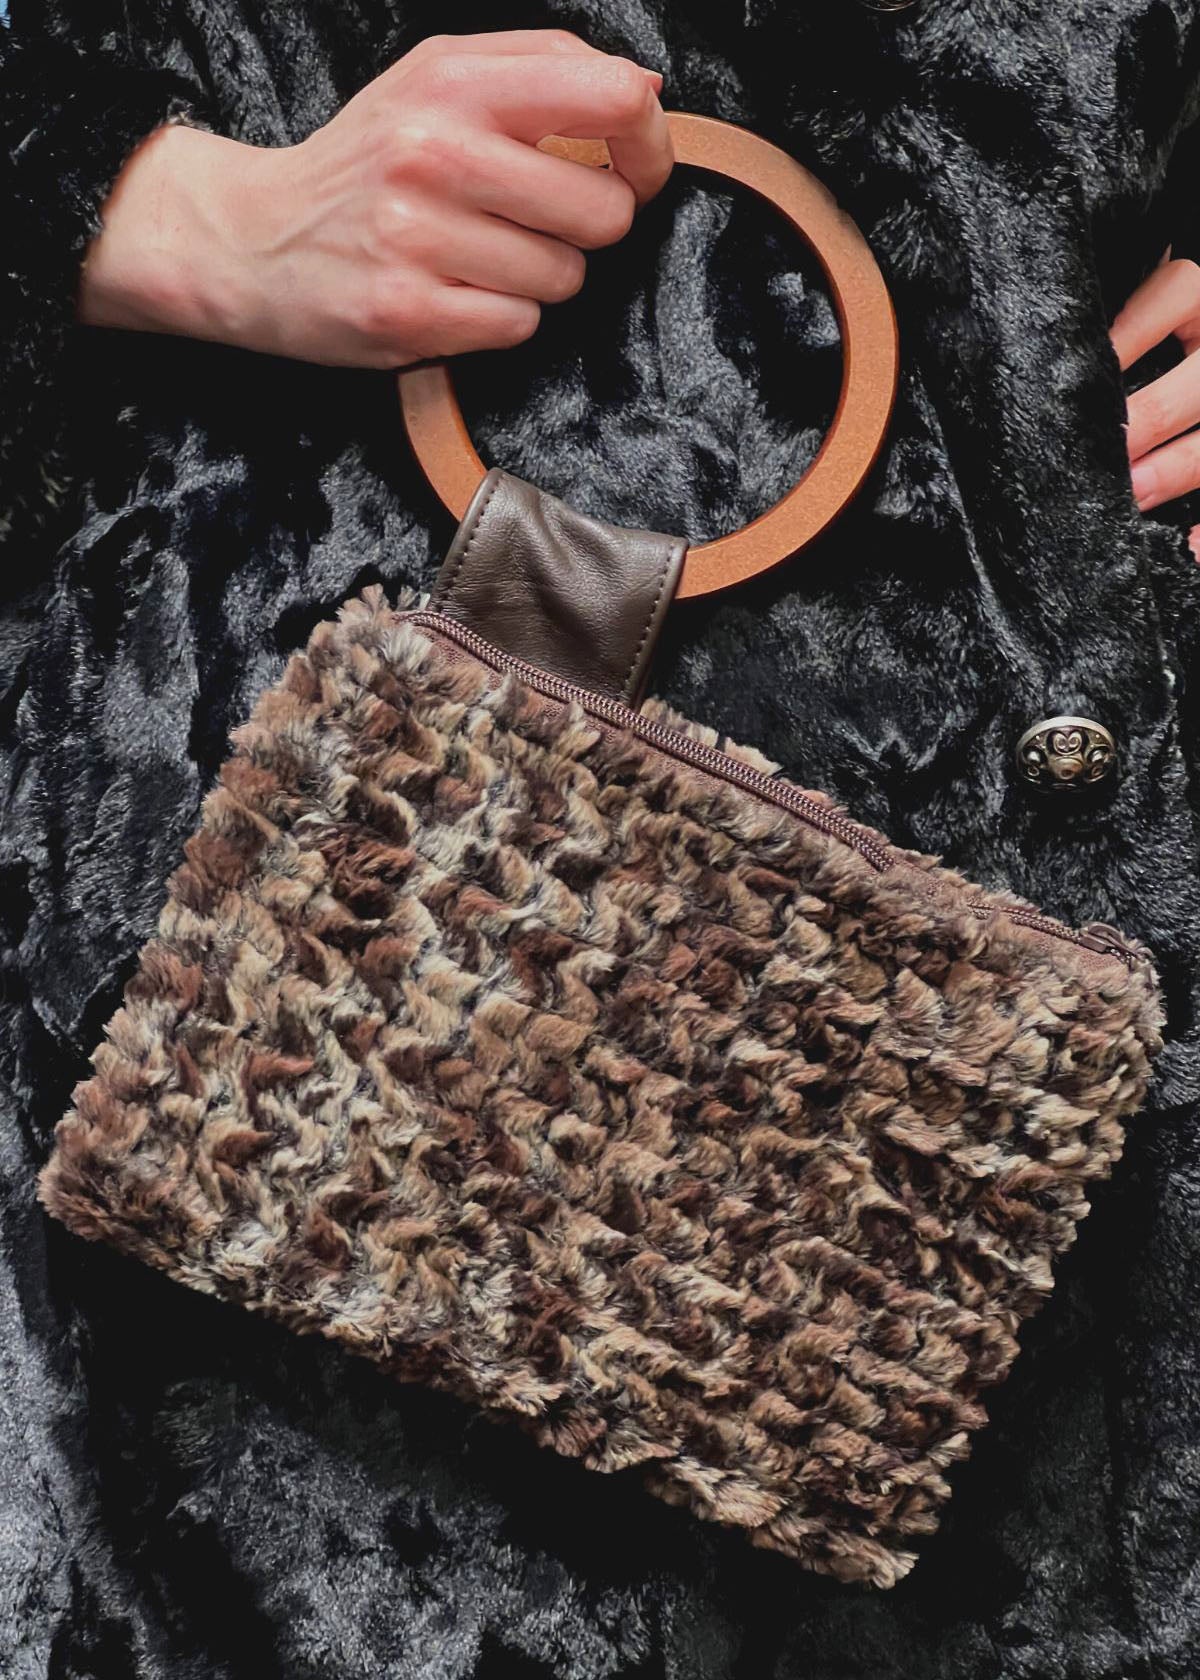 Paris Clutch - Luxury Faux Fur in Calico (One Small Left!)